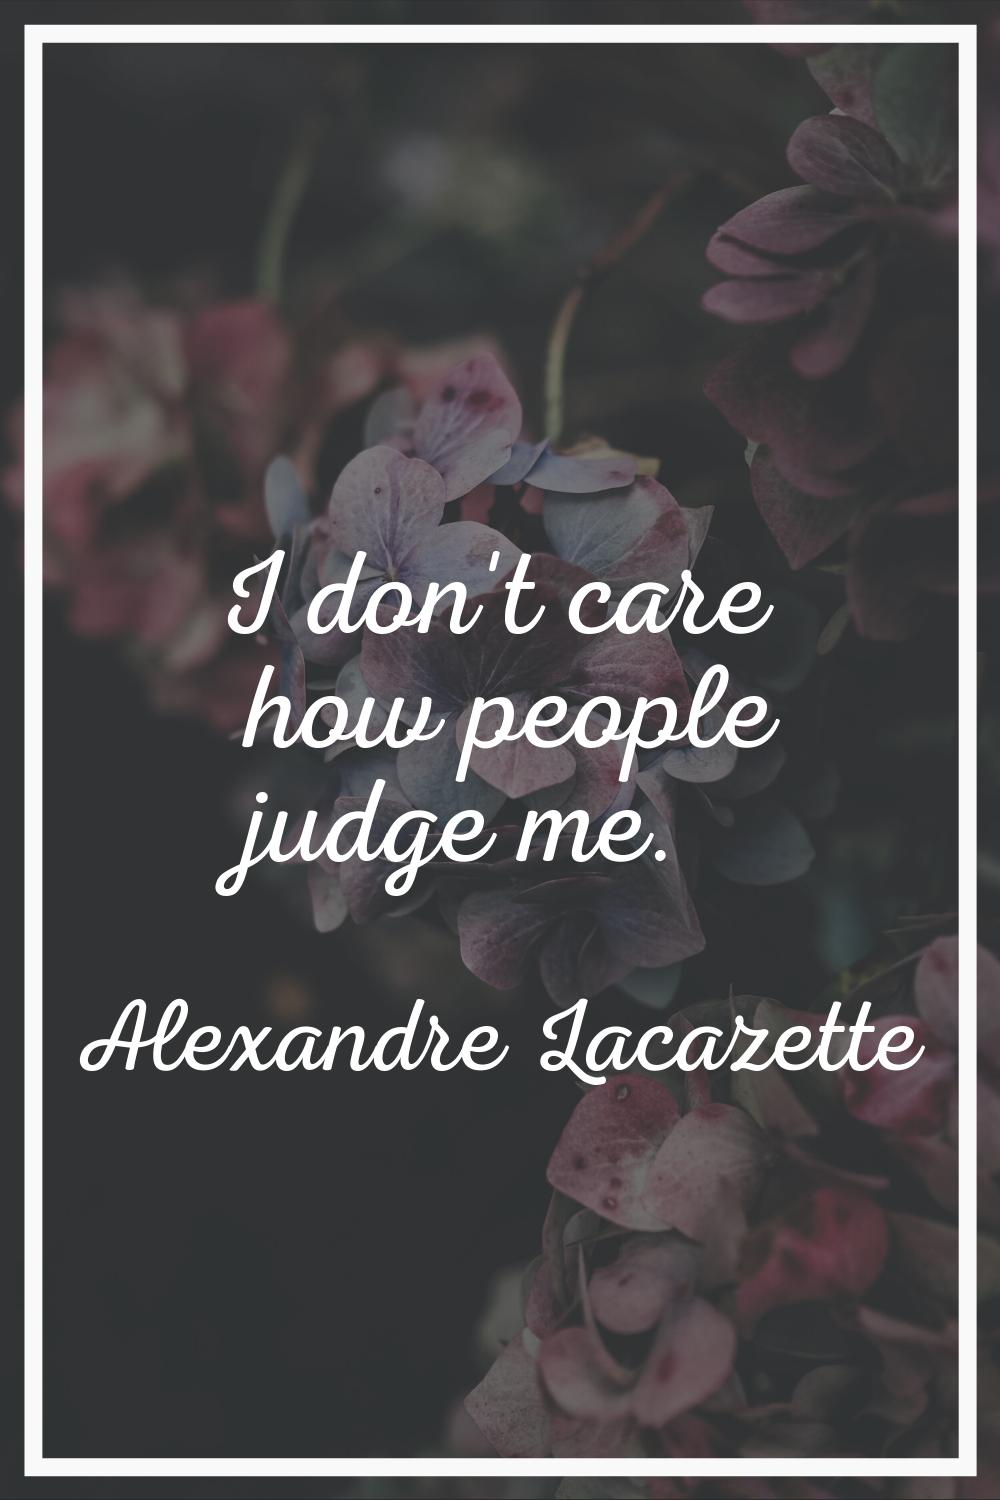 I don't care how people judge me.